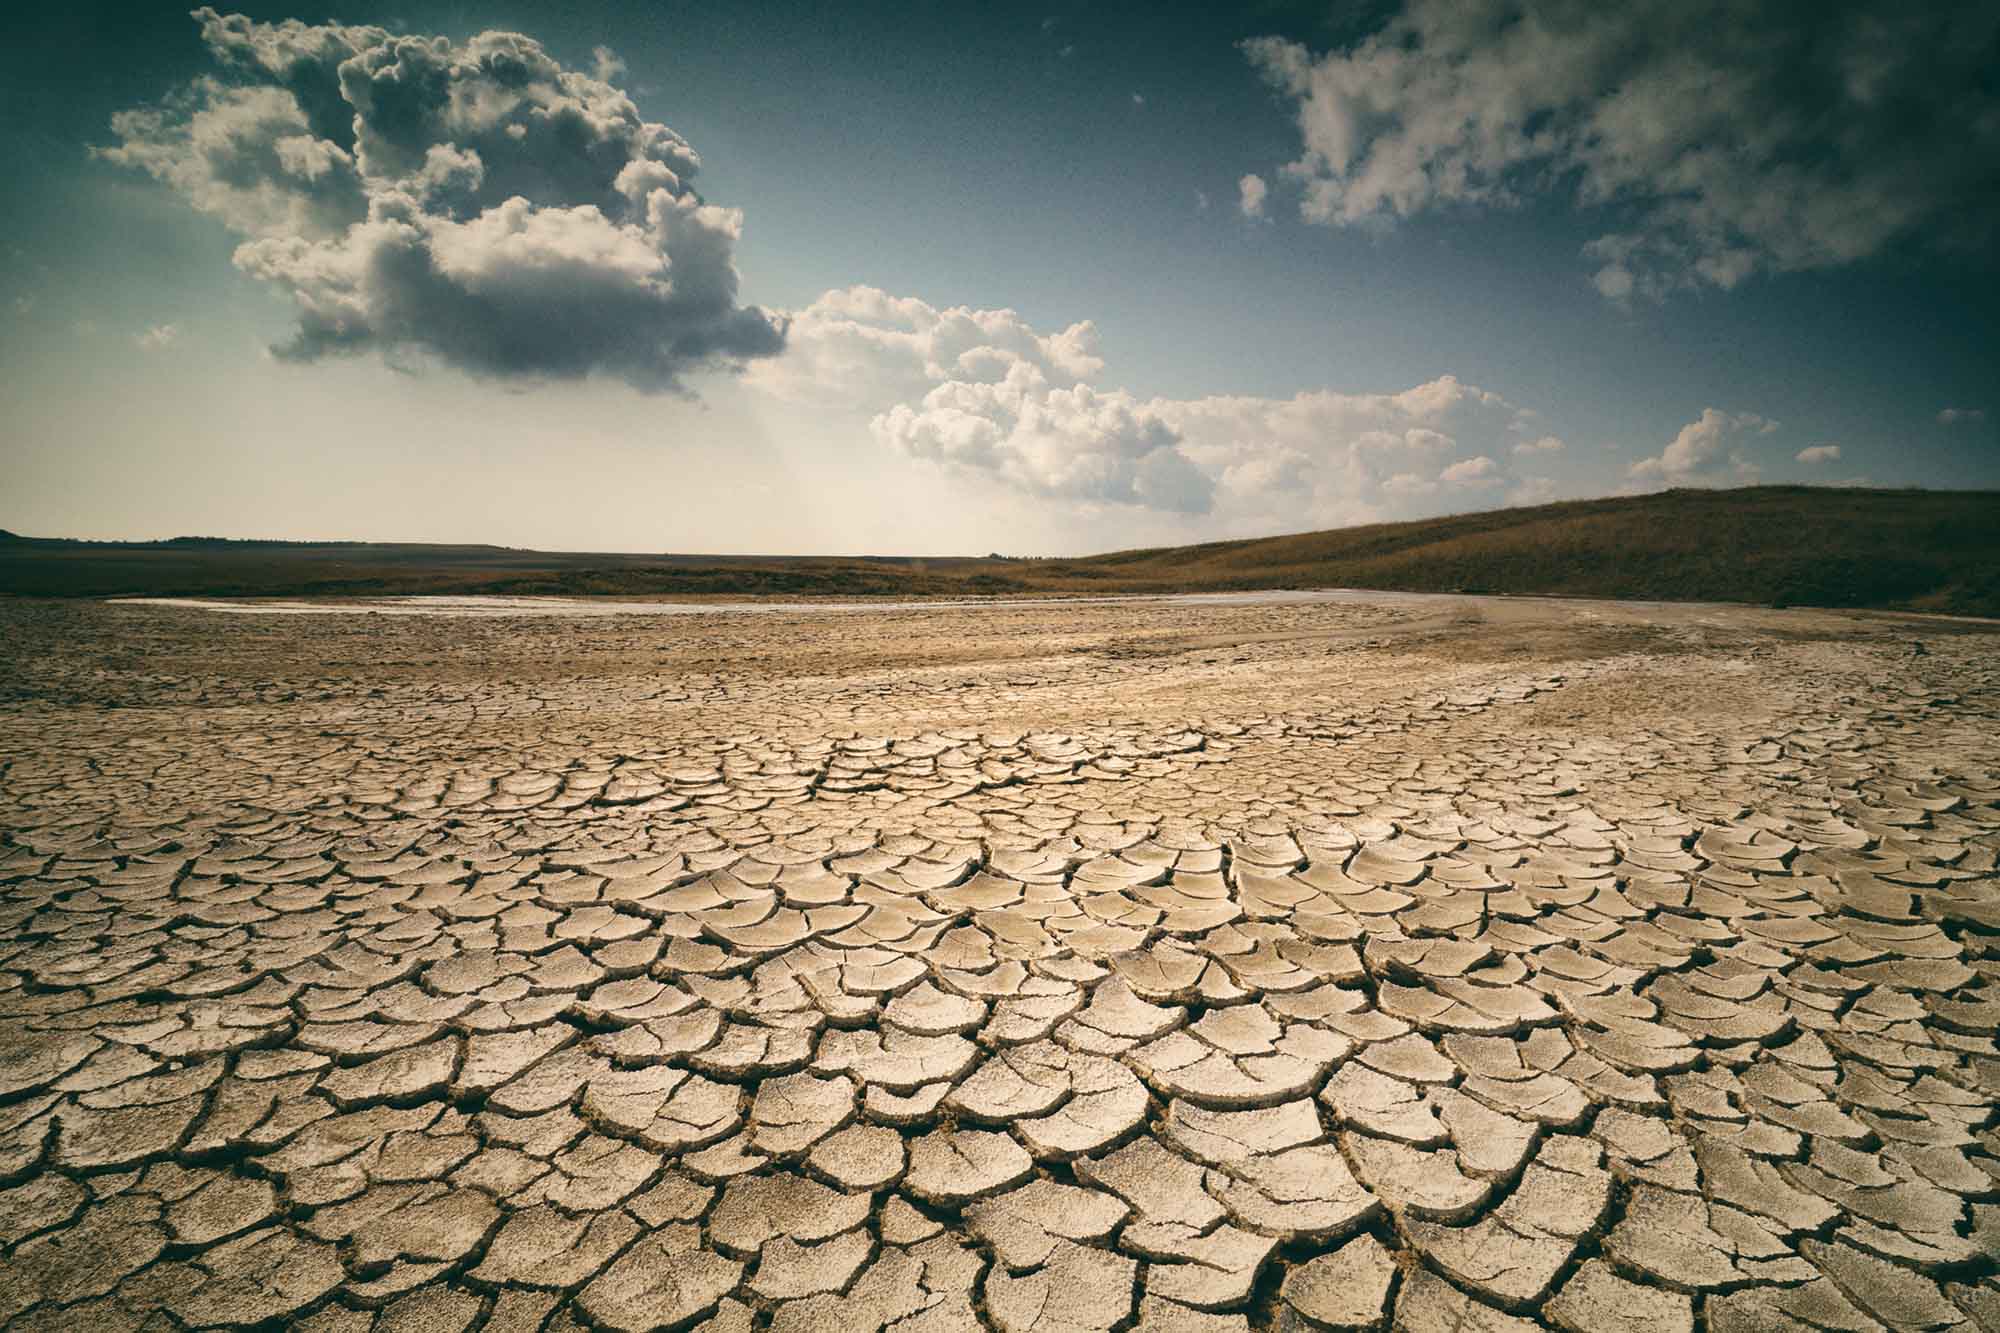 10 Drought Facts Everyone Should Know